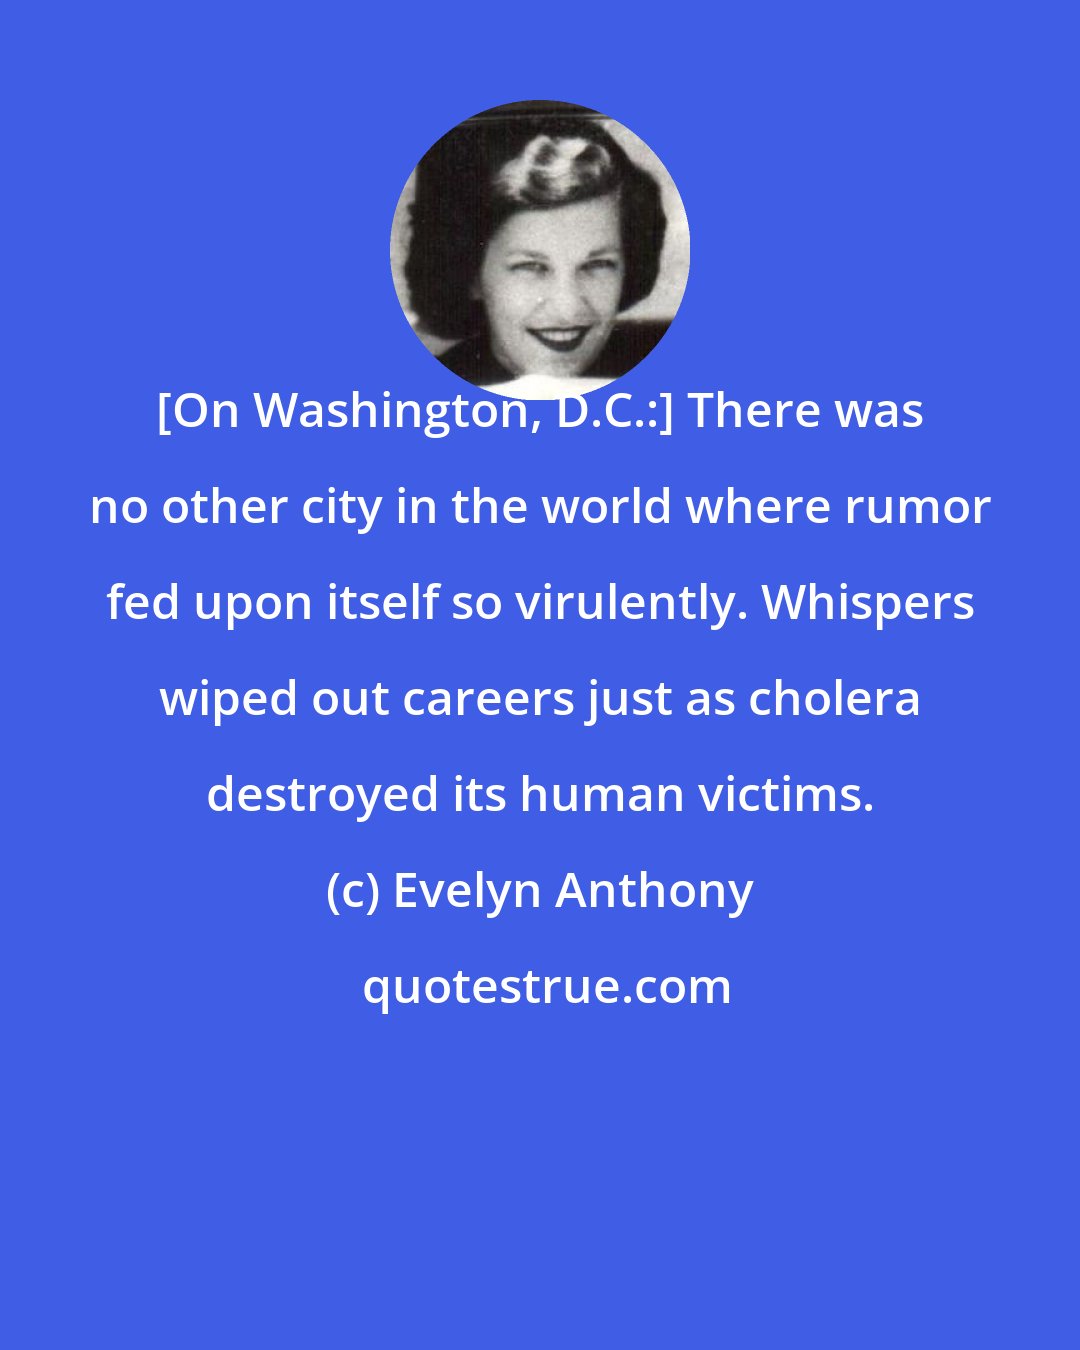 Evelyn Anthony: [On Washington, D.C.:] There was no other city in the world where rumor fed upon itself so virulently. Whispers wiped out careers just as cholera destroyed its human victims.